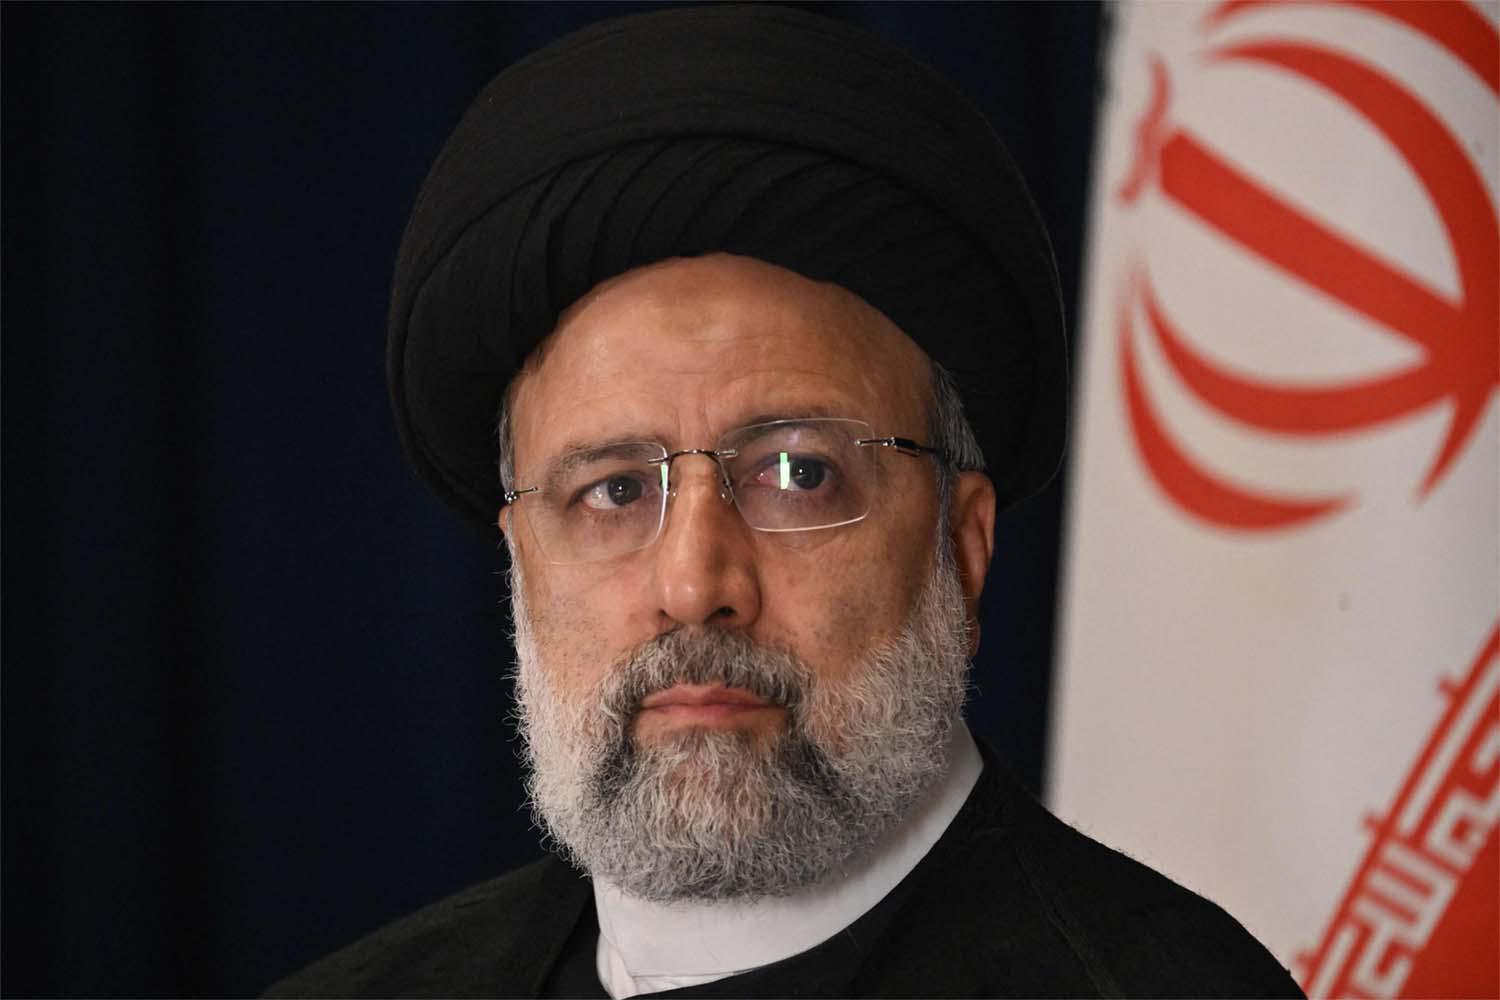 Raisi: those inspectors that are trustworthy can continue their work in Iran